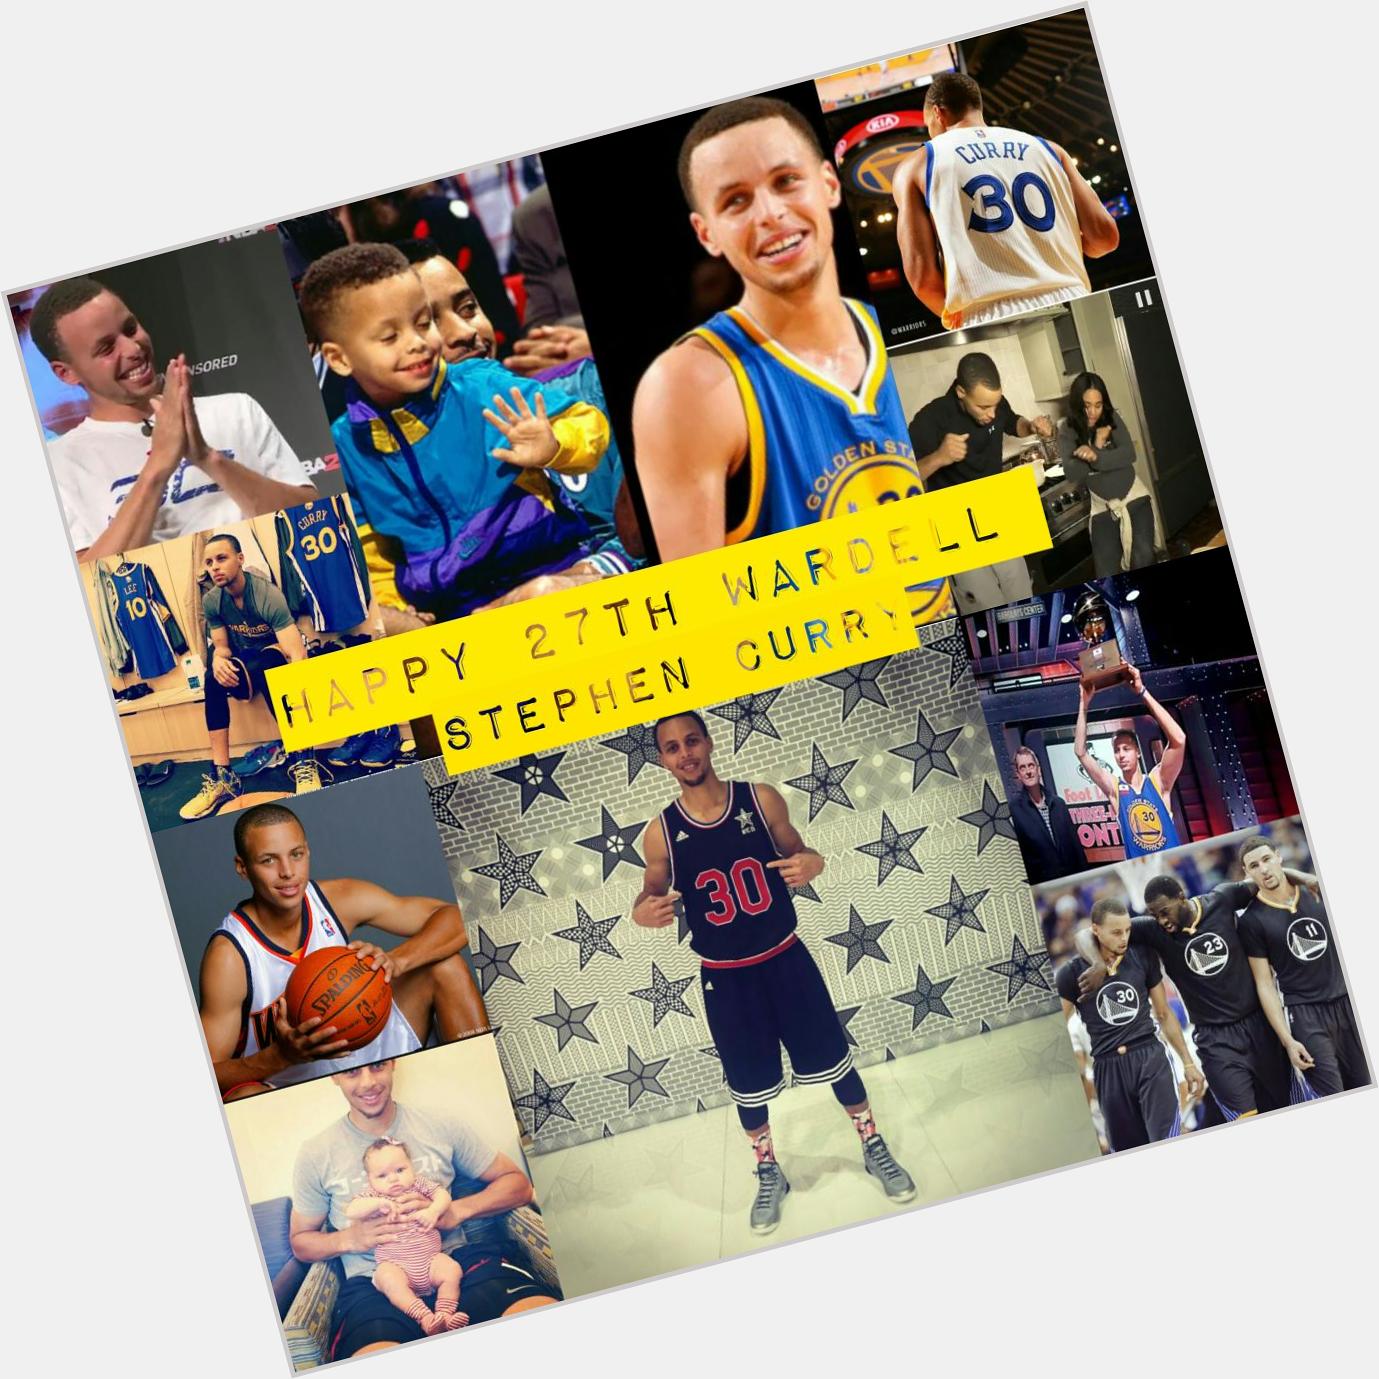 HAPPY 27TH BIRTHDAY TO THE LOVE OF MY LIFE STEPHEN CURRY Words cannot explain how great you are on/off the court 